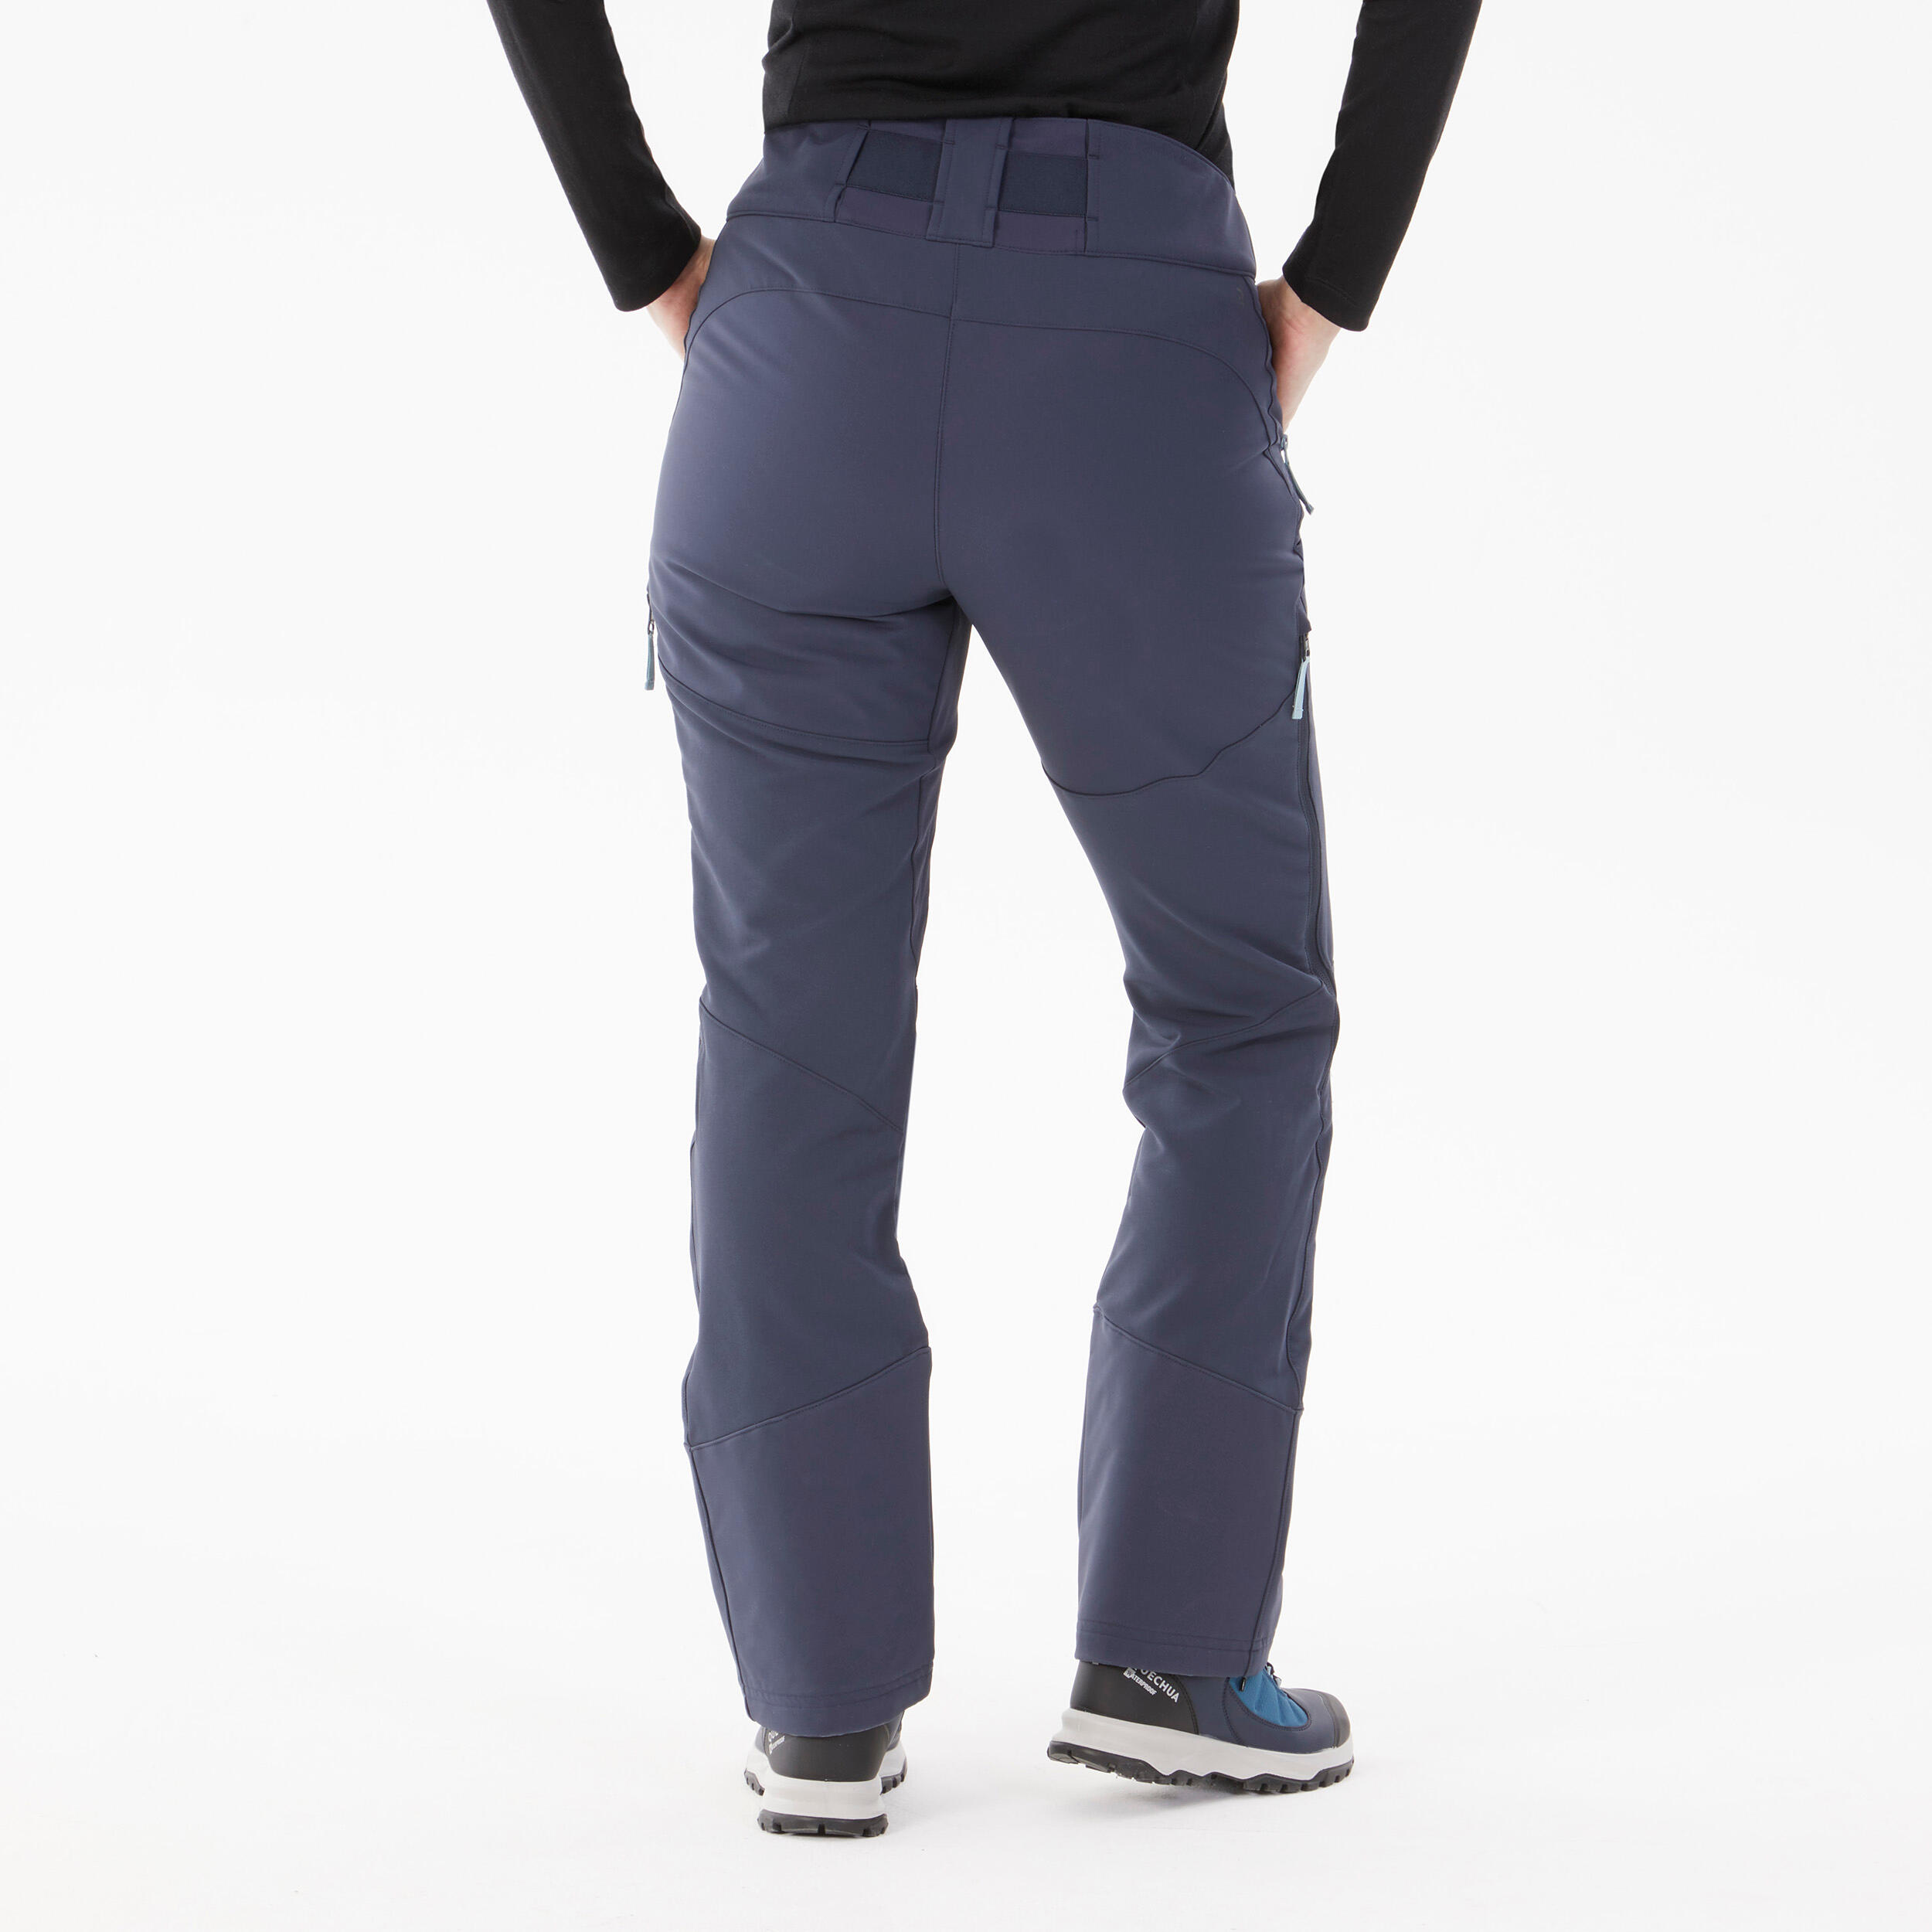 Women’s warm water-repellent ventilated hiking trousers - SH500 MOUNTAIN VENTIL 3/7